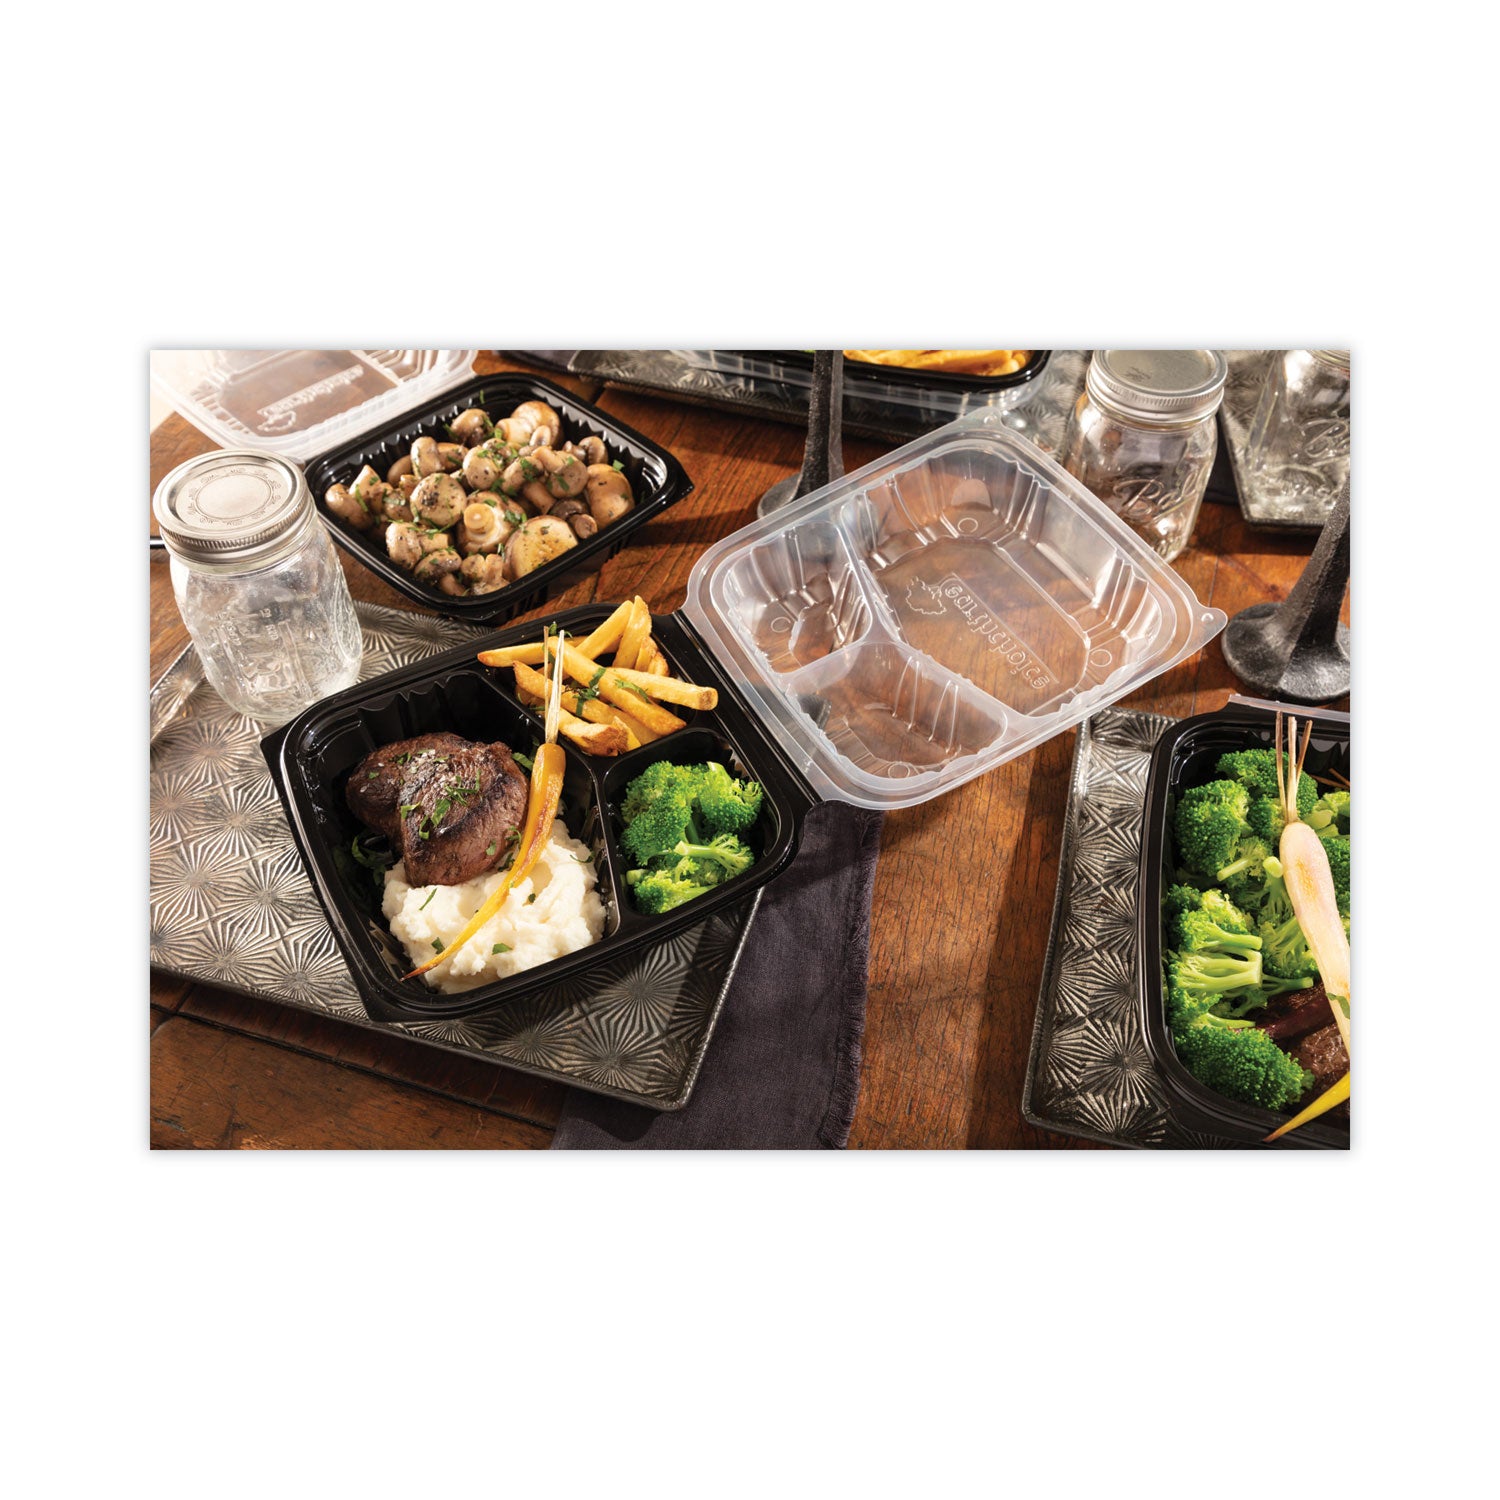 earthchoice-vented-dual-color-microwavable-hinged-lid-container-3-comp-base-lid-34-oz-105x95x3-blk-clr-plastic-132-ct_pctdc109330b000 - 6